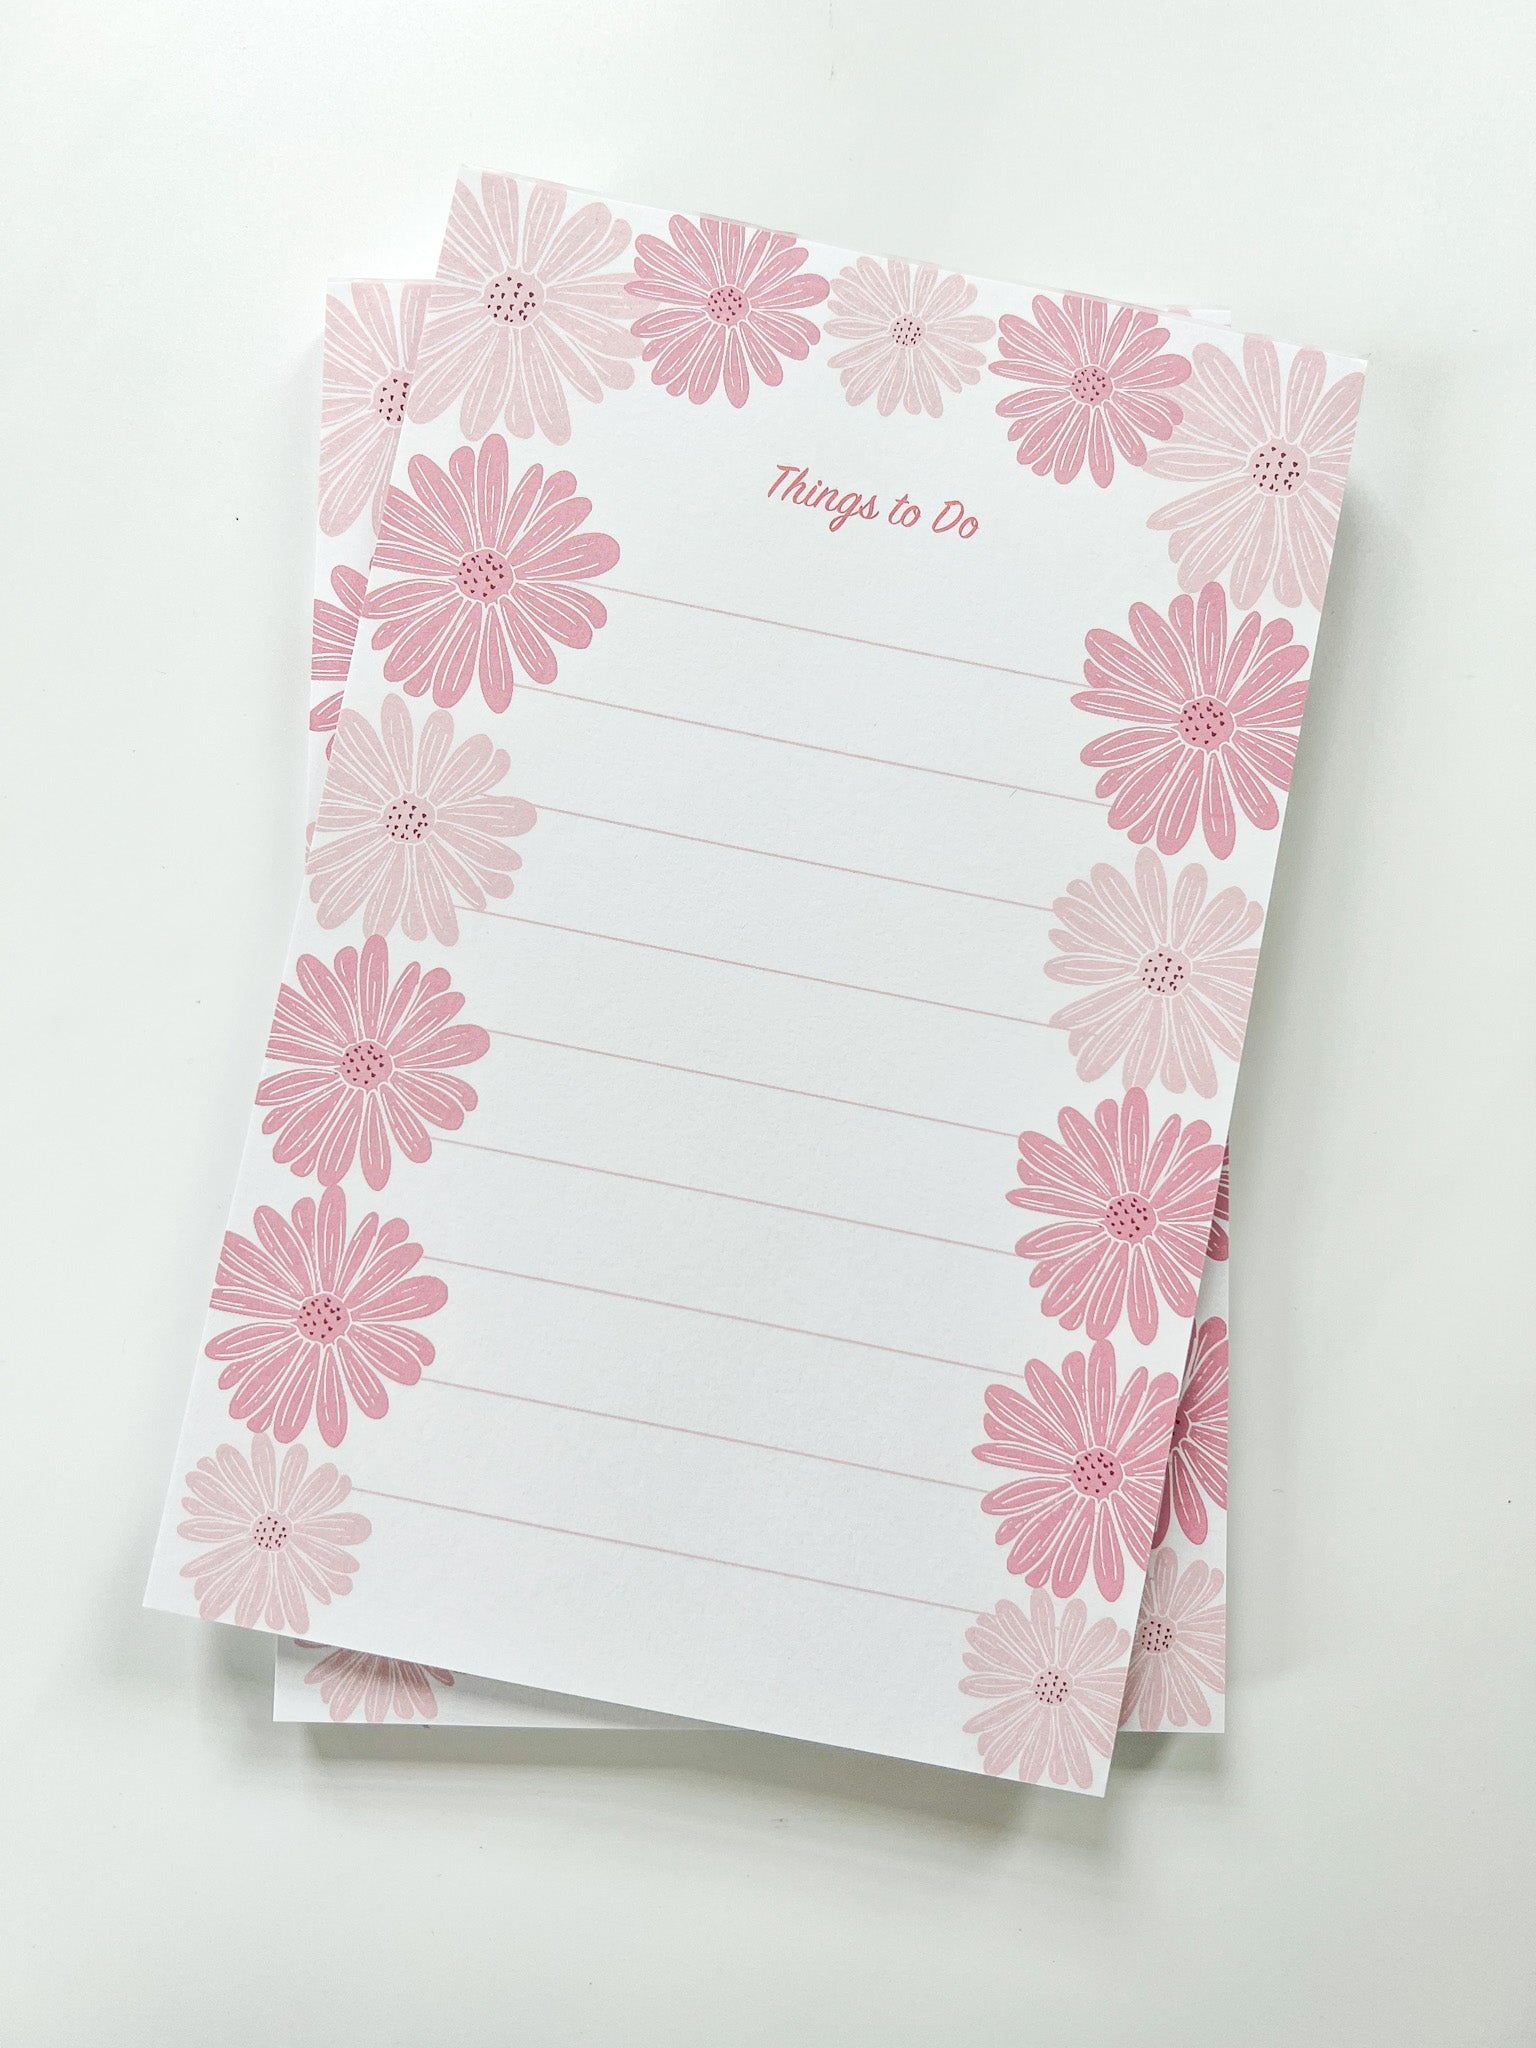 cute pink floral notepad with lines and fun phrase